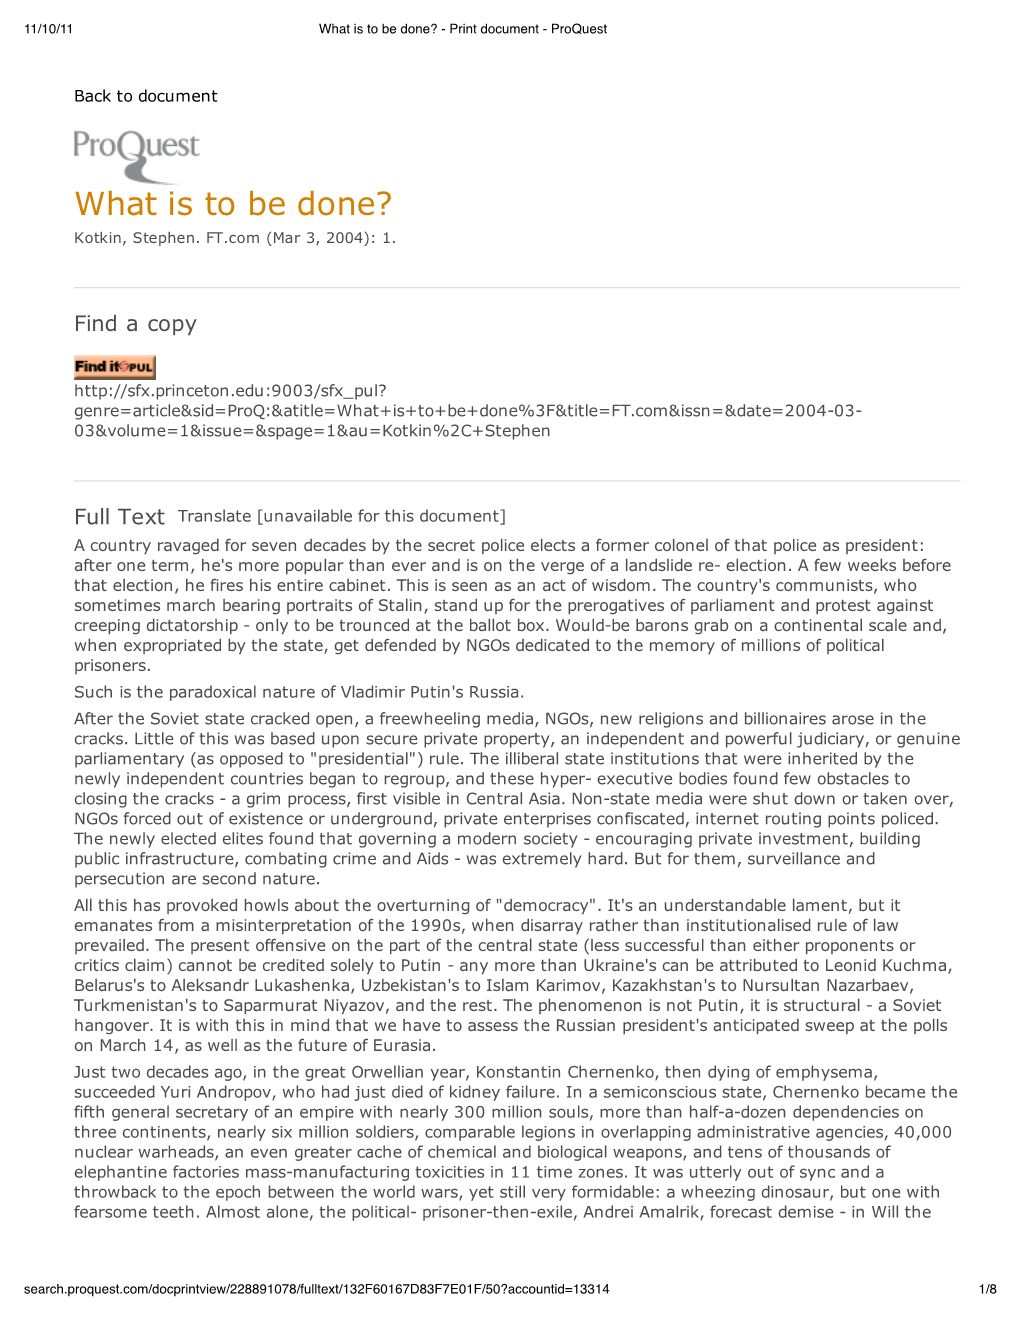 What Is to Be Done? - Print Document - Proquest